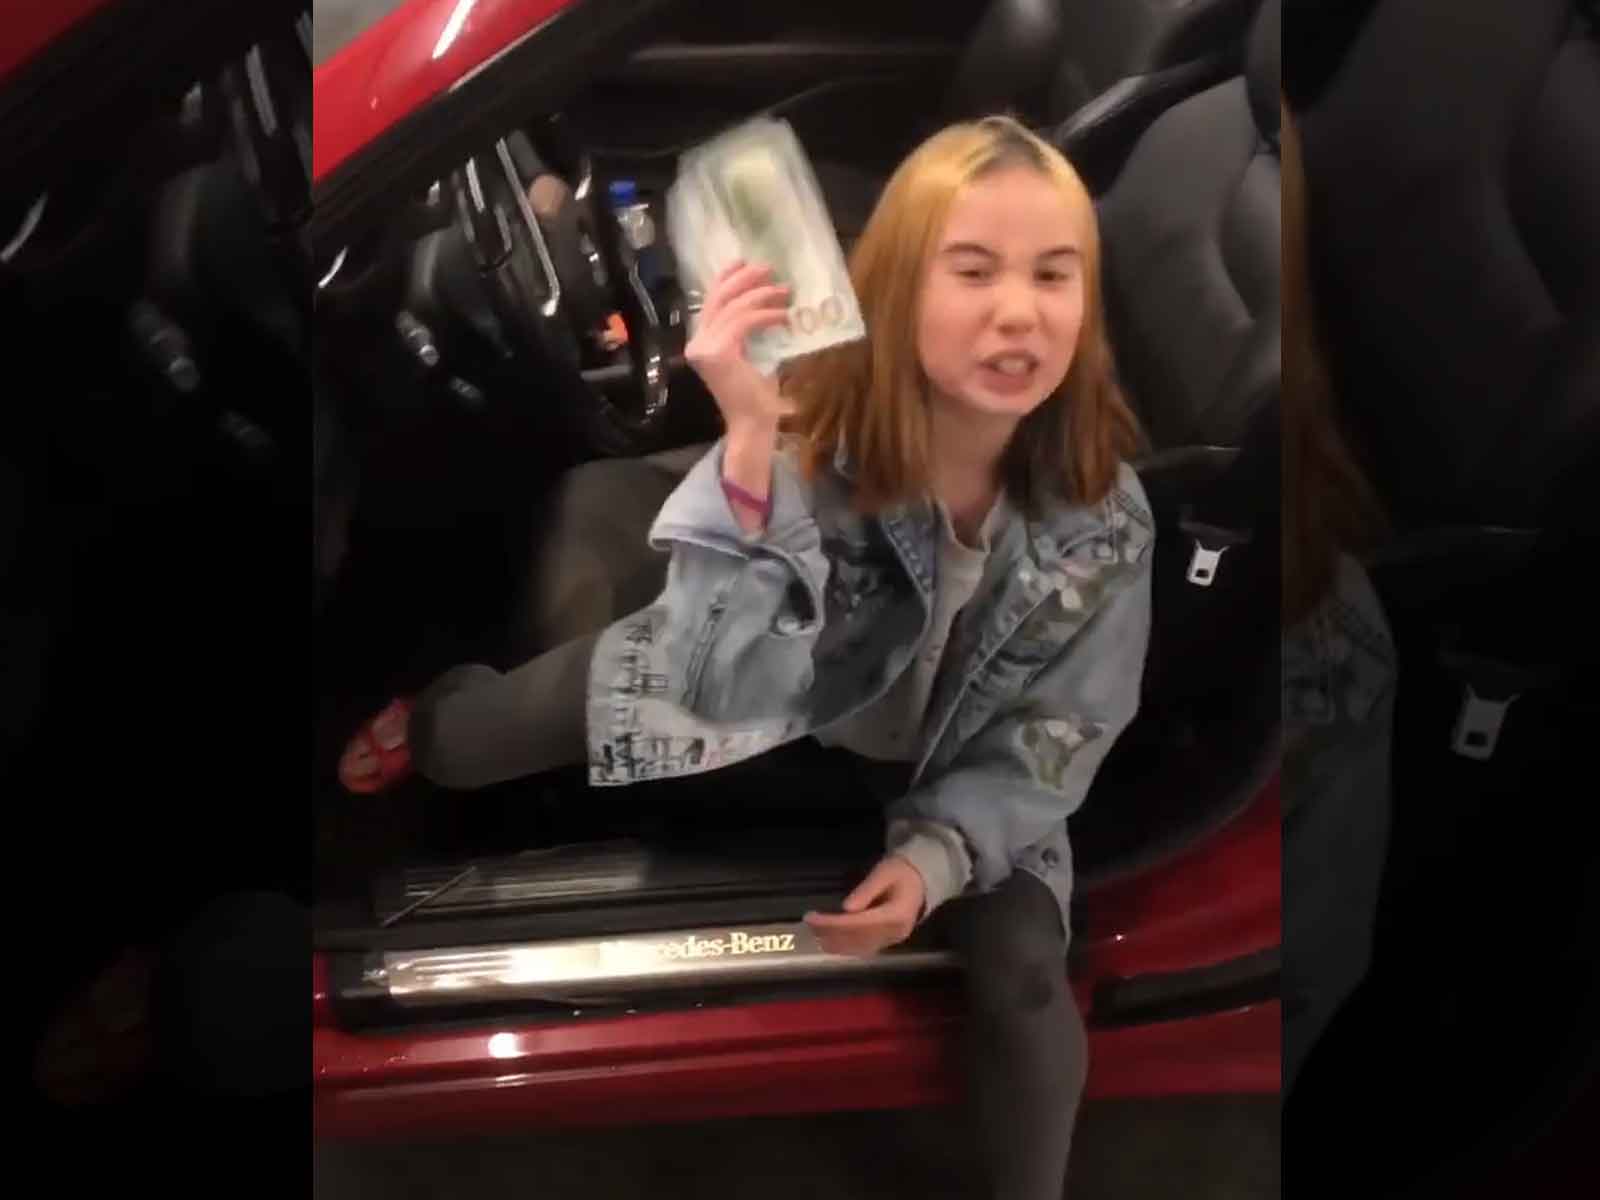 Lil Tay Exposed As A Flexing Fraud Homes And Cars Belonged To Others